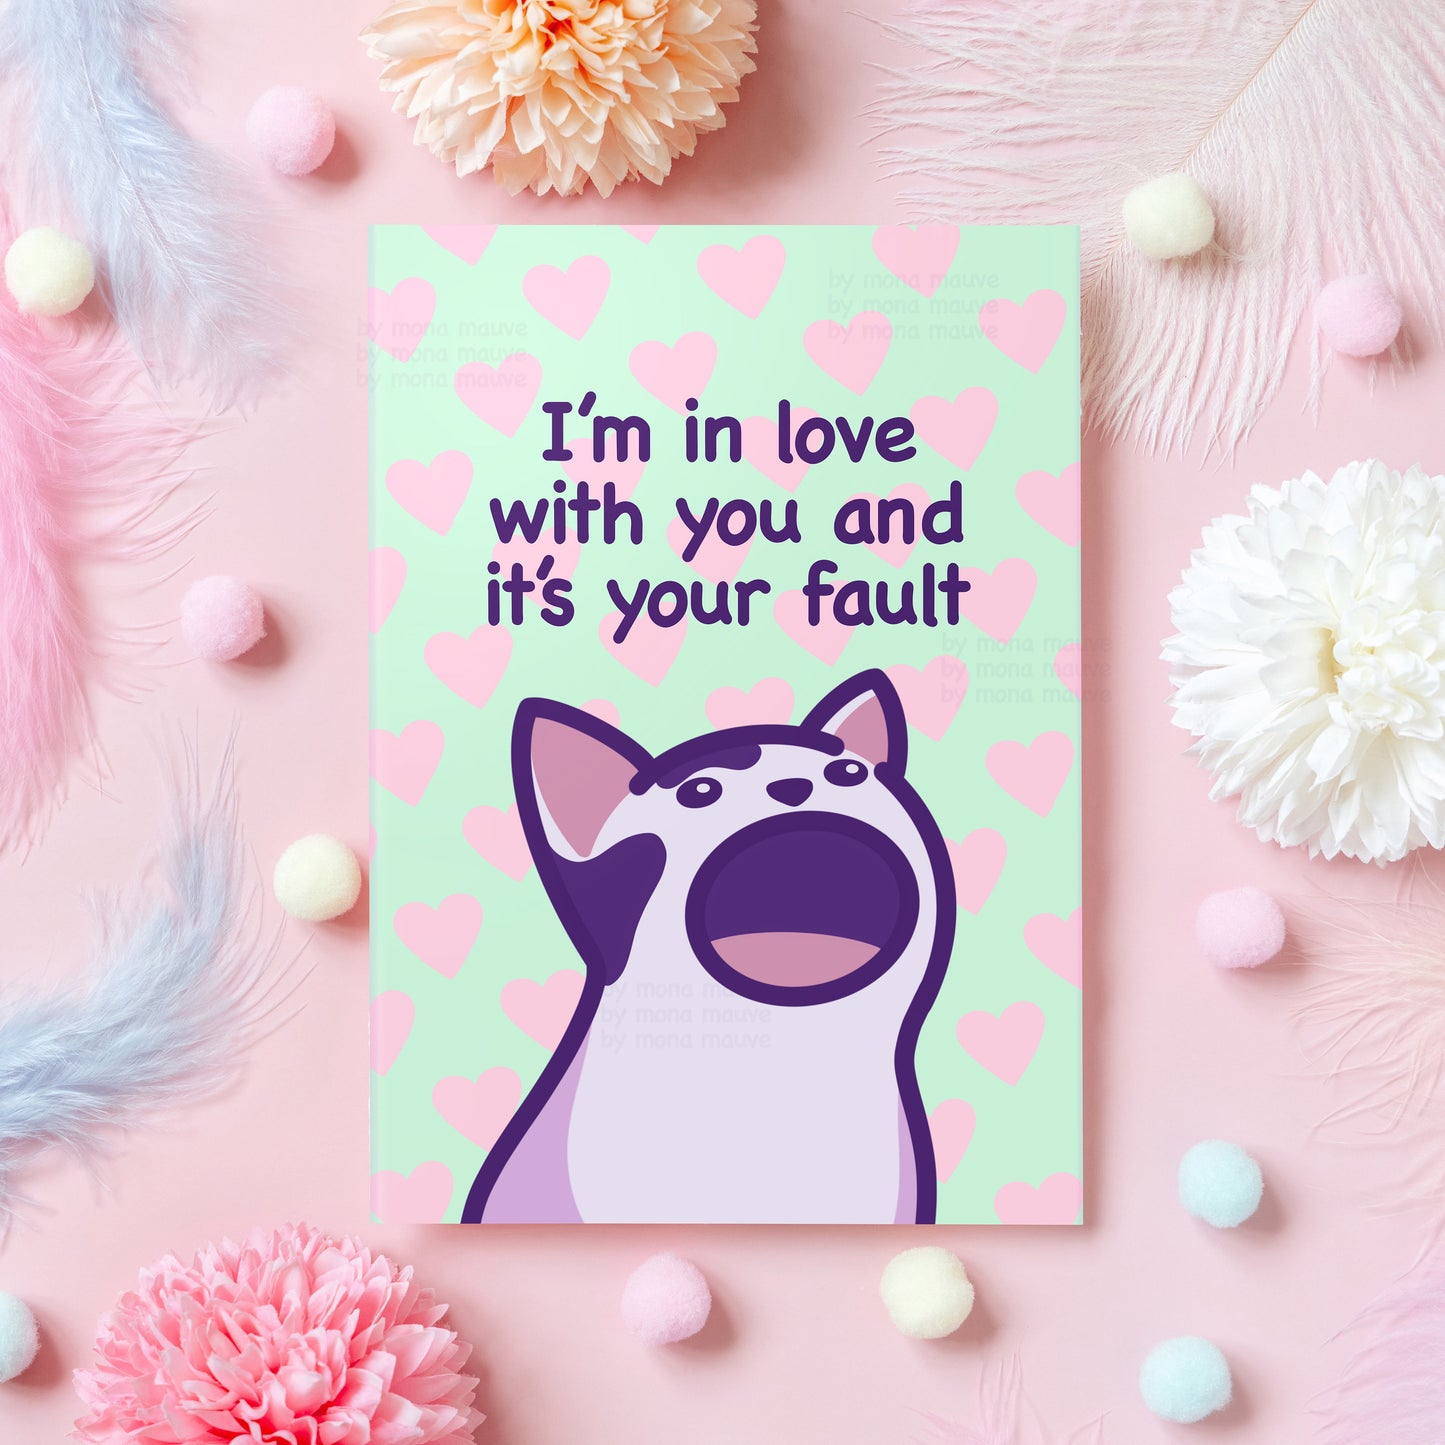 Funny Pop Cat Anniversary Card | Cat Meme Love Card | I’m in Love With You and It’s Your Fault | For Boyfriend, Girlfriend, Husband, Wife - Her or Him